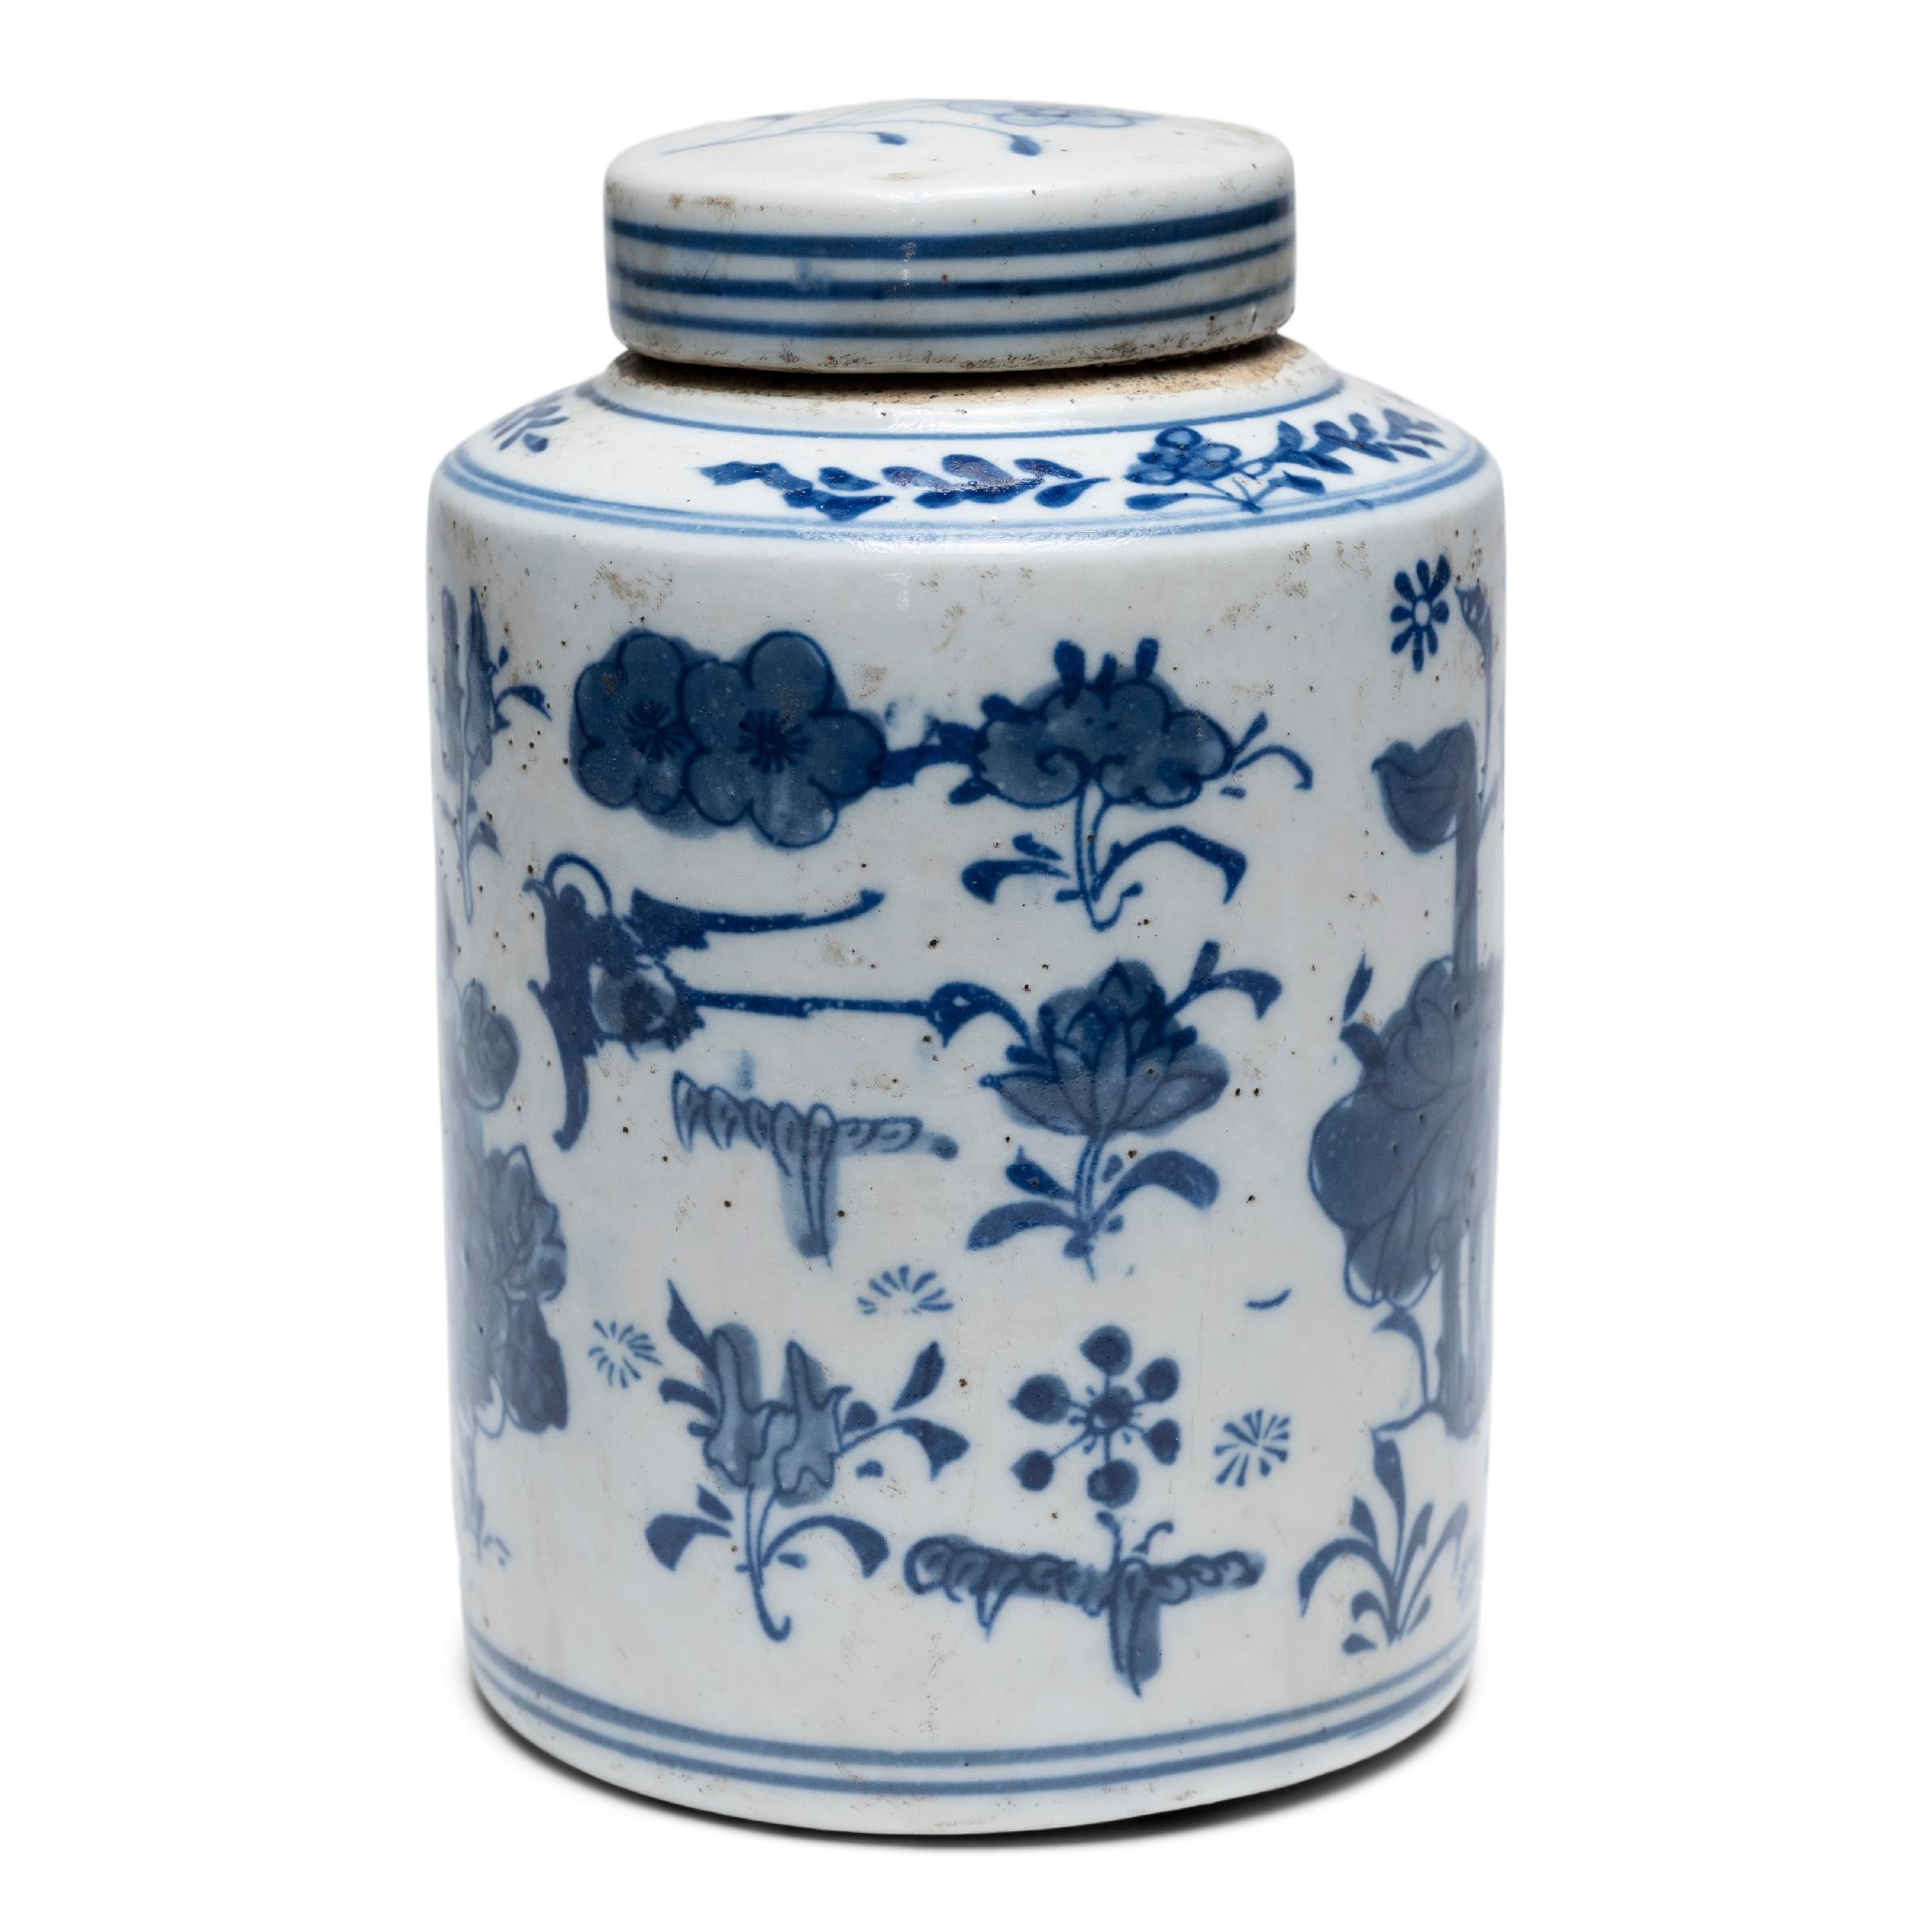 Lidded jars like these were used in tea shops throughout China, where tea drinking was a symbol of taste and upper-class refinement. This tea leaf jar dates to the early 20th century and exemplifies the timeless allure of blue-and-white porcelain.